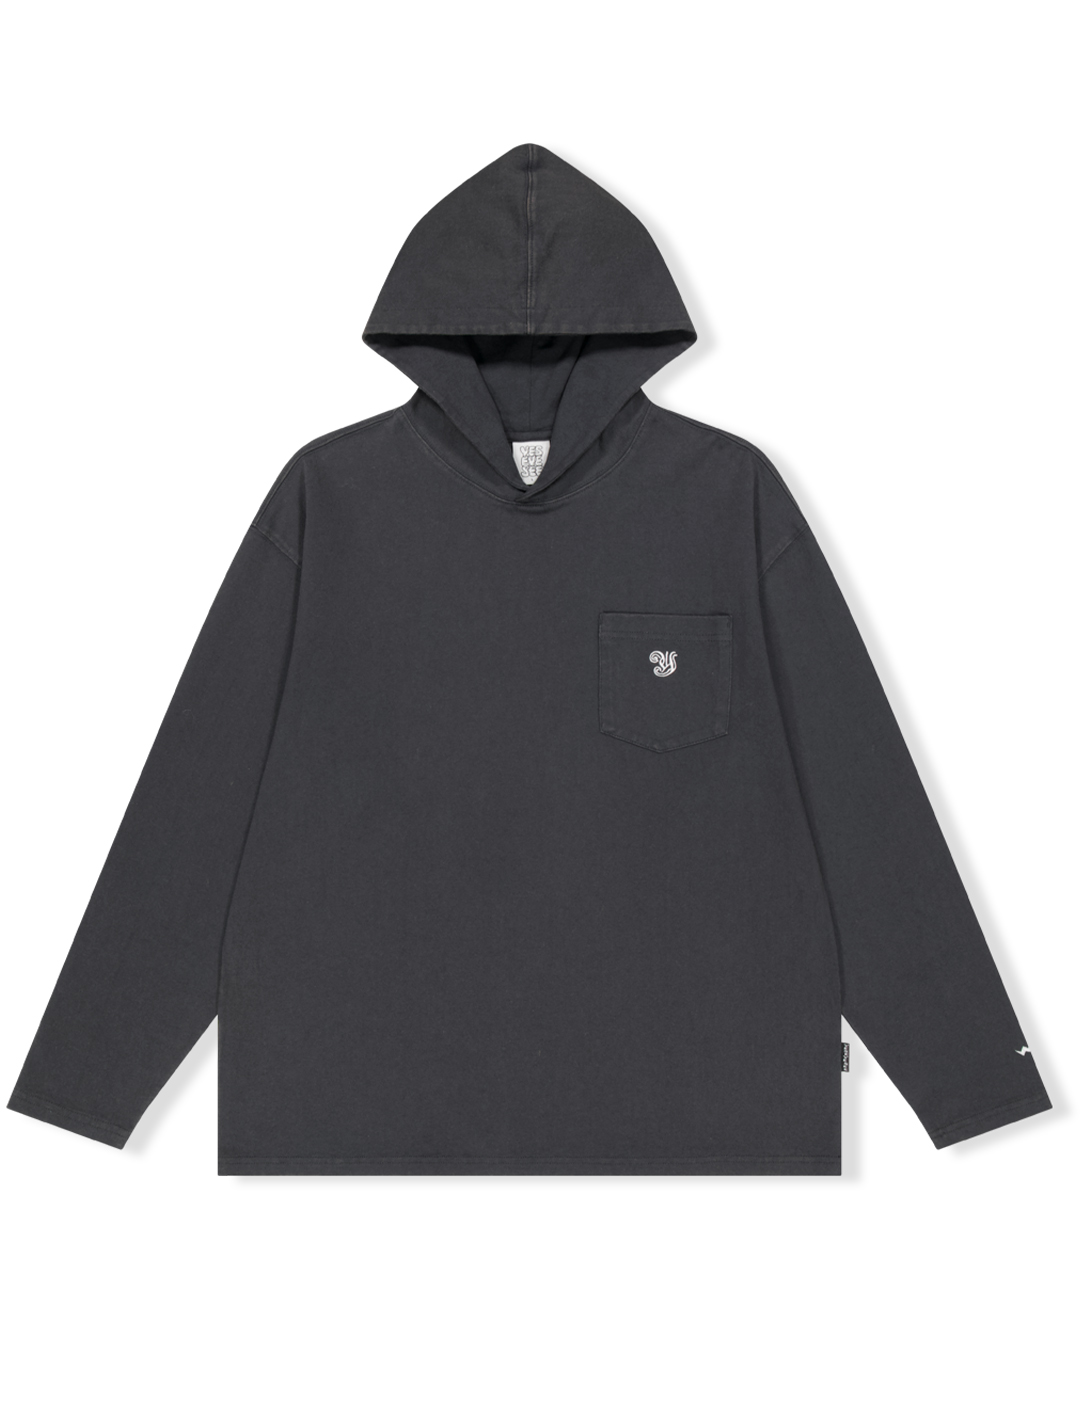 Y.E.S Washed Single Hoodie Charcoal